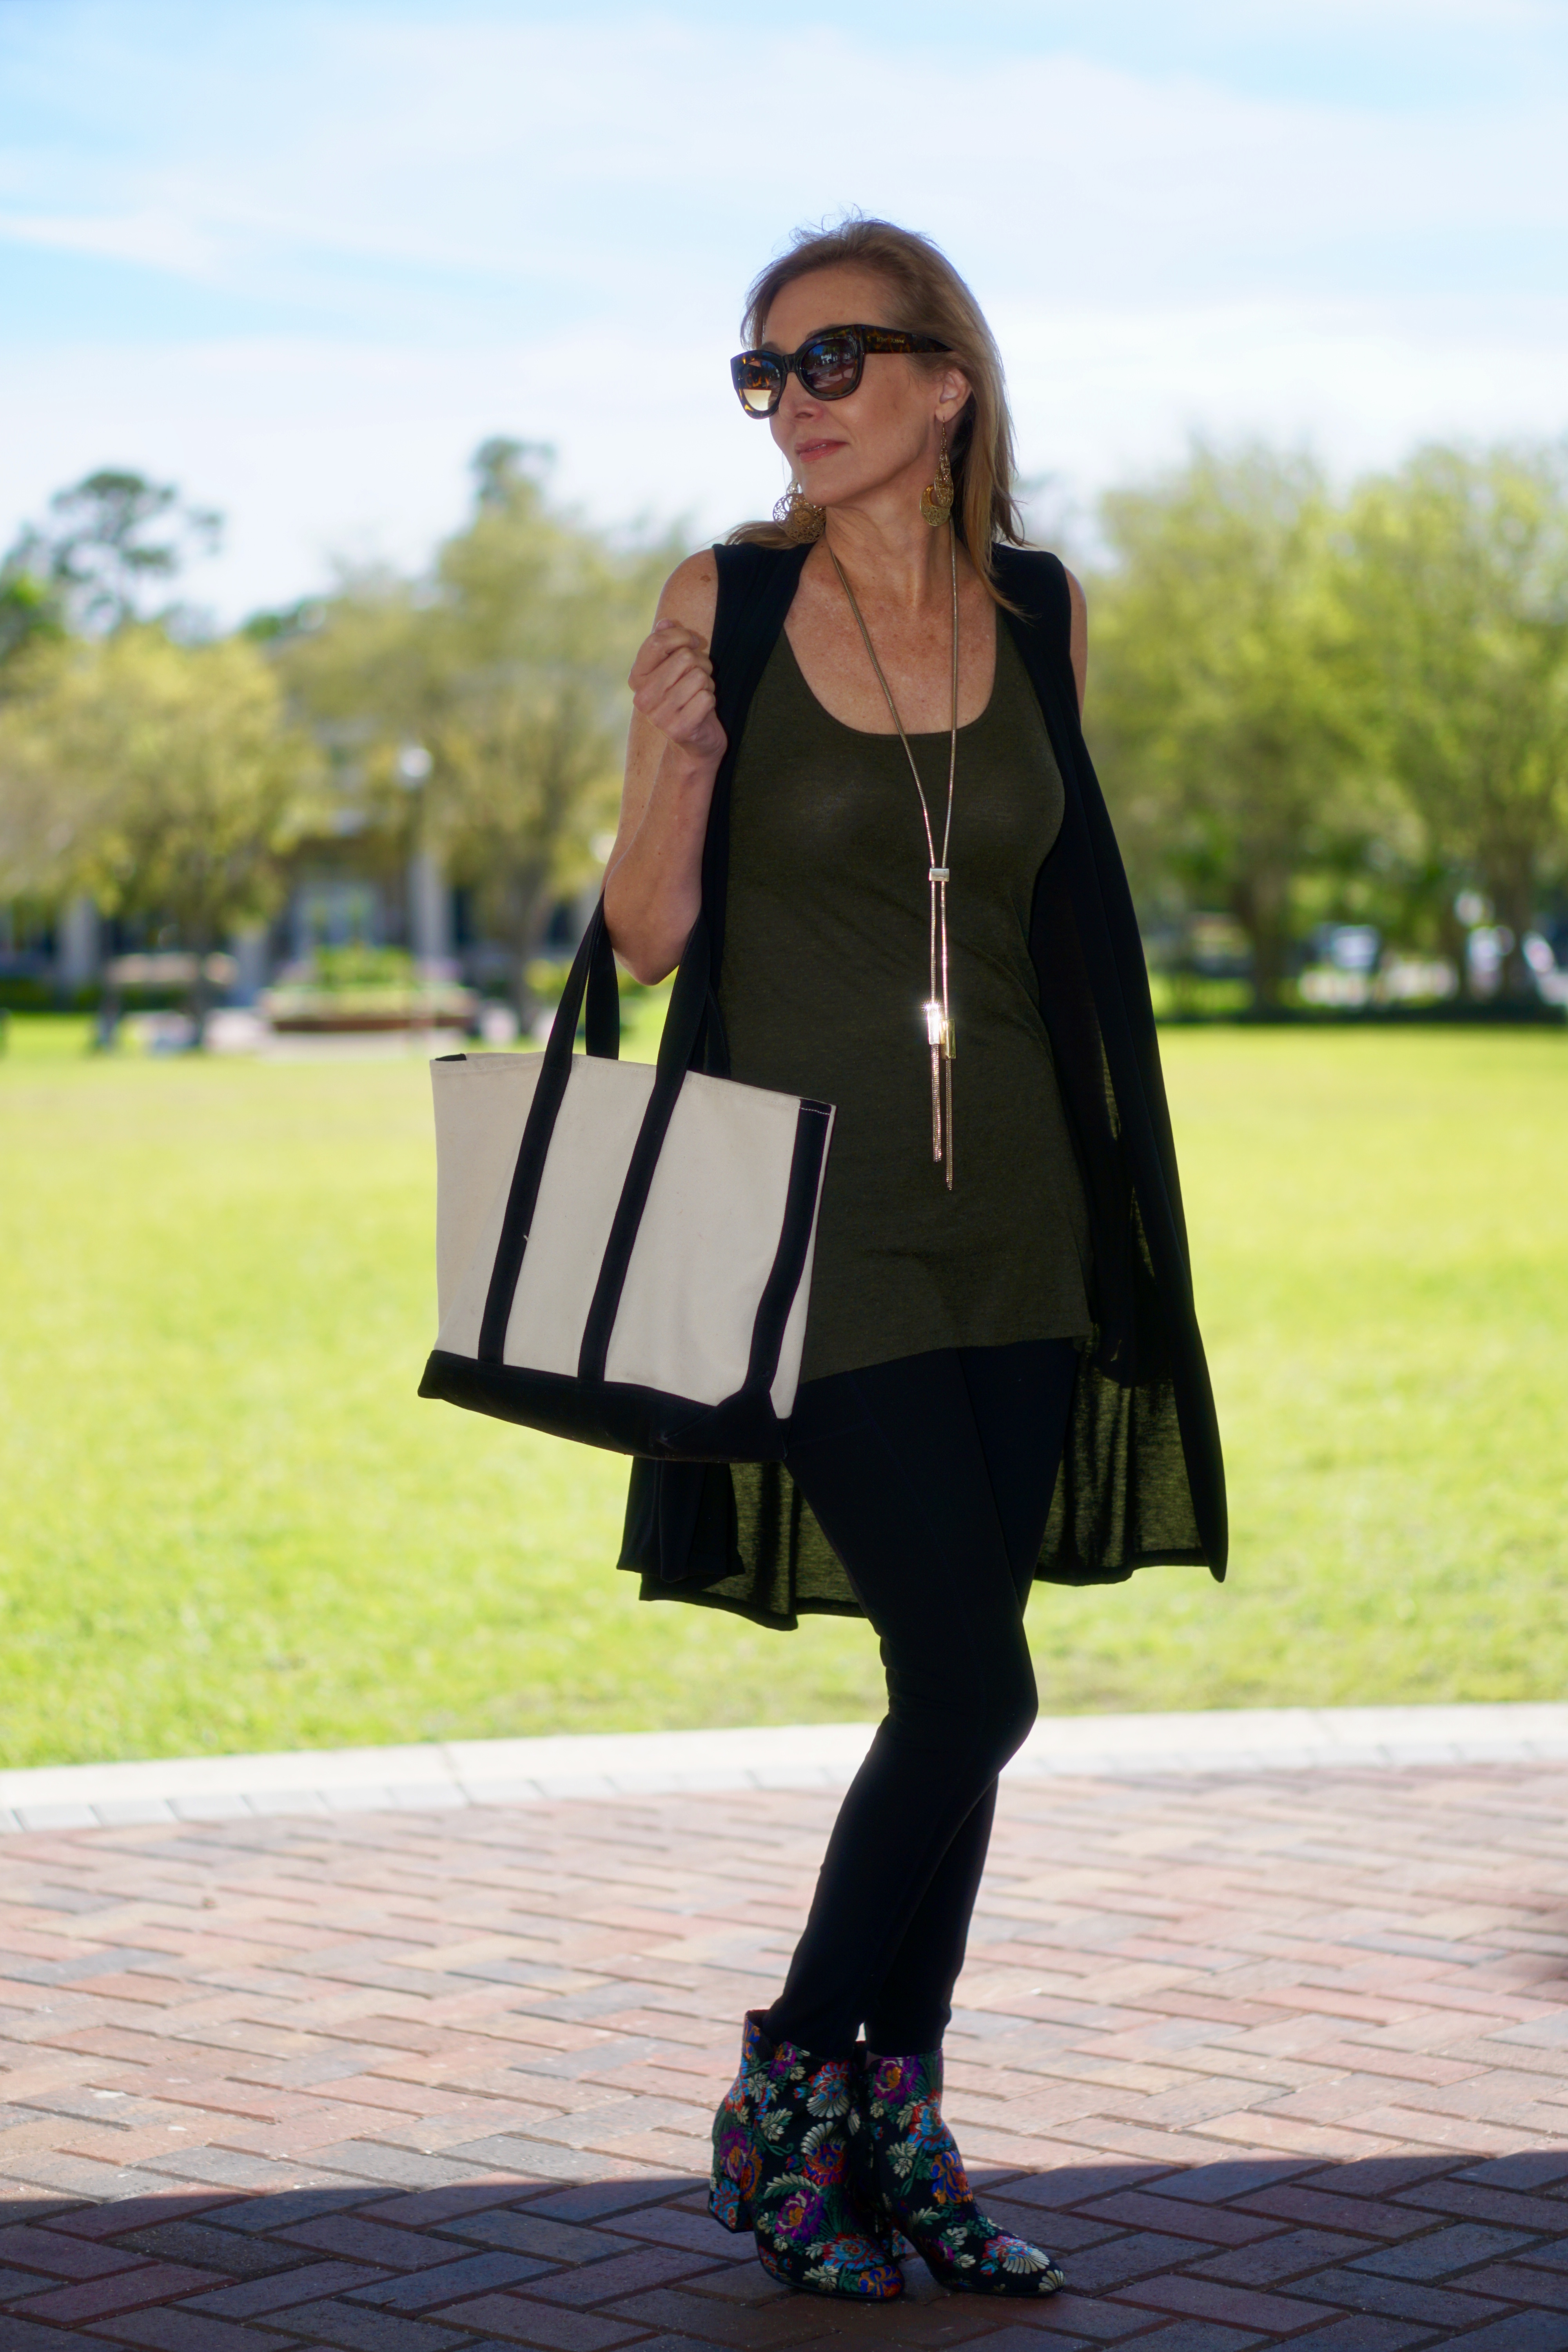 How to Wear Workout Clothes in Public, styling tips featured by top Tampo over 50 fashion blog, Sharing A Journey: Nina from sharingajourney wearing a black duster and leggings